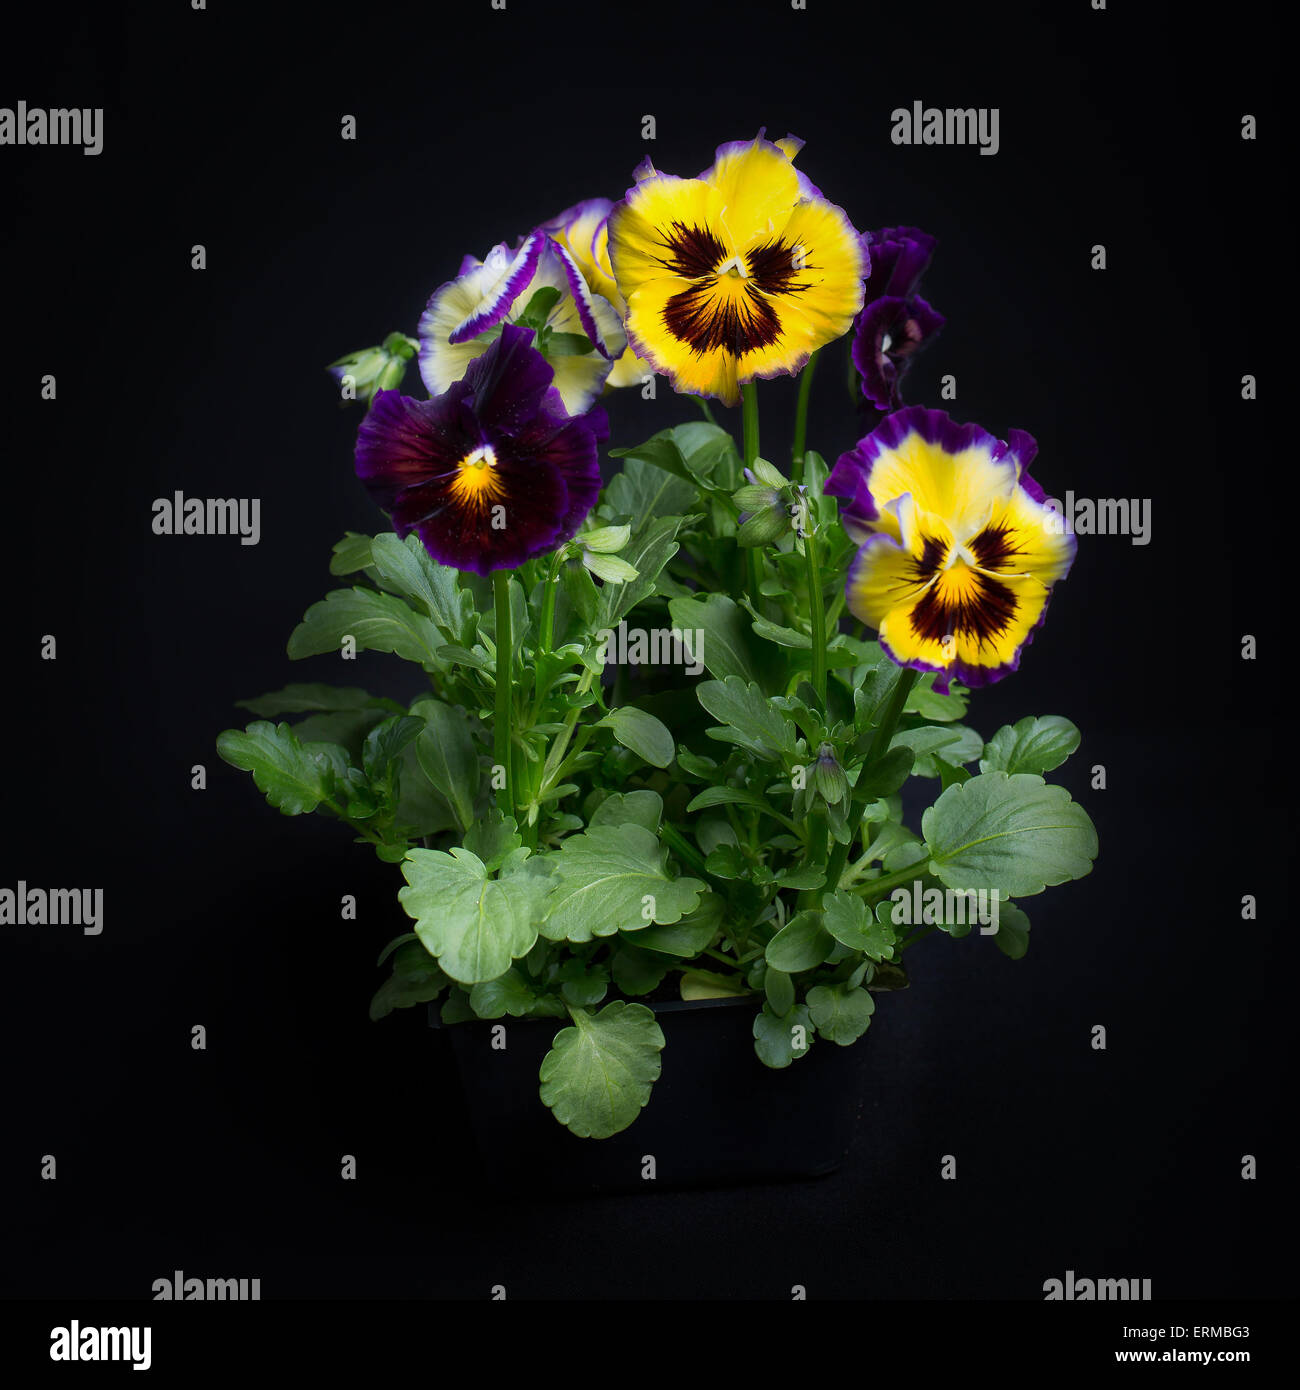 A small group of pansies grown in a black plastic pack and on a black background. Stock Photo